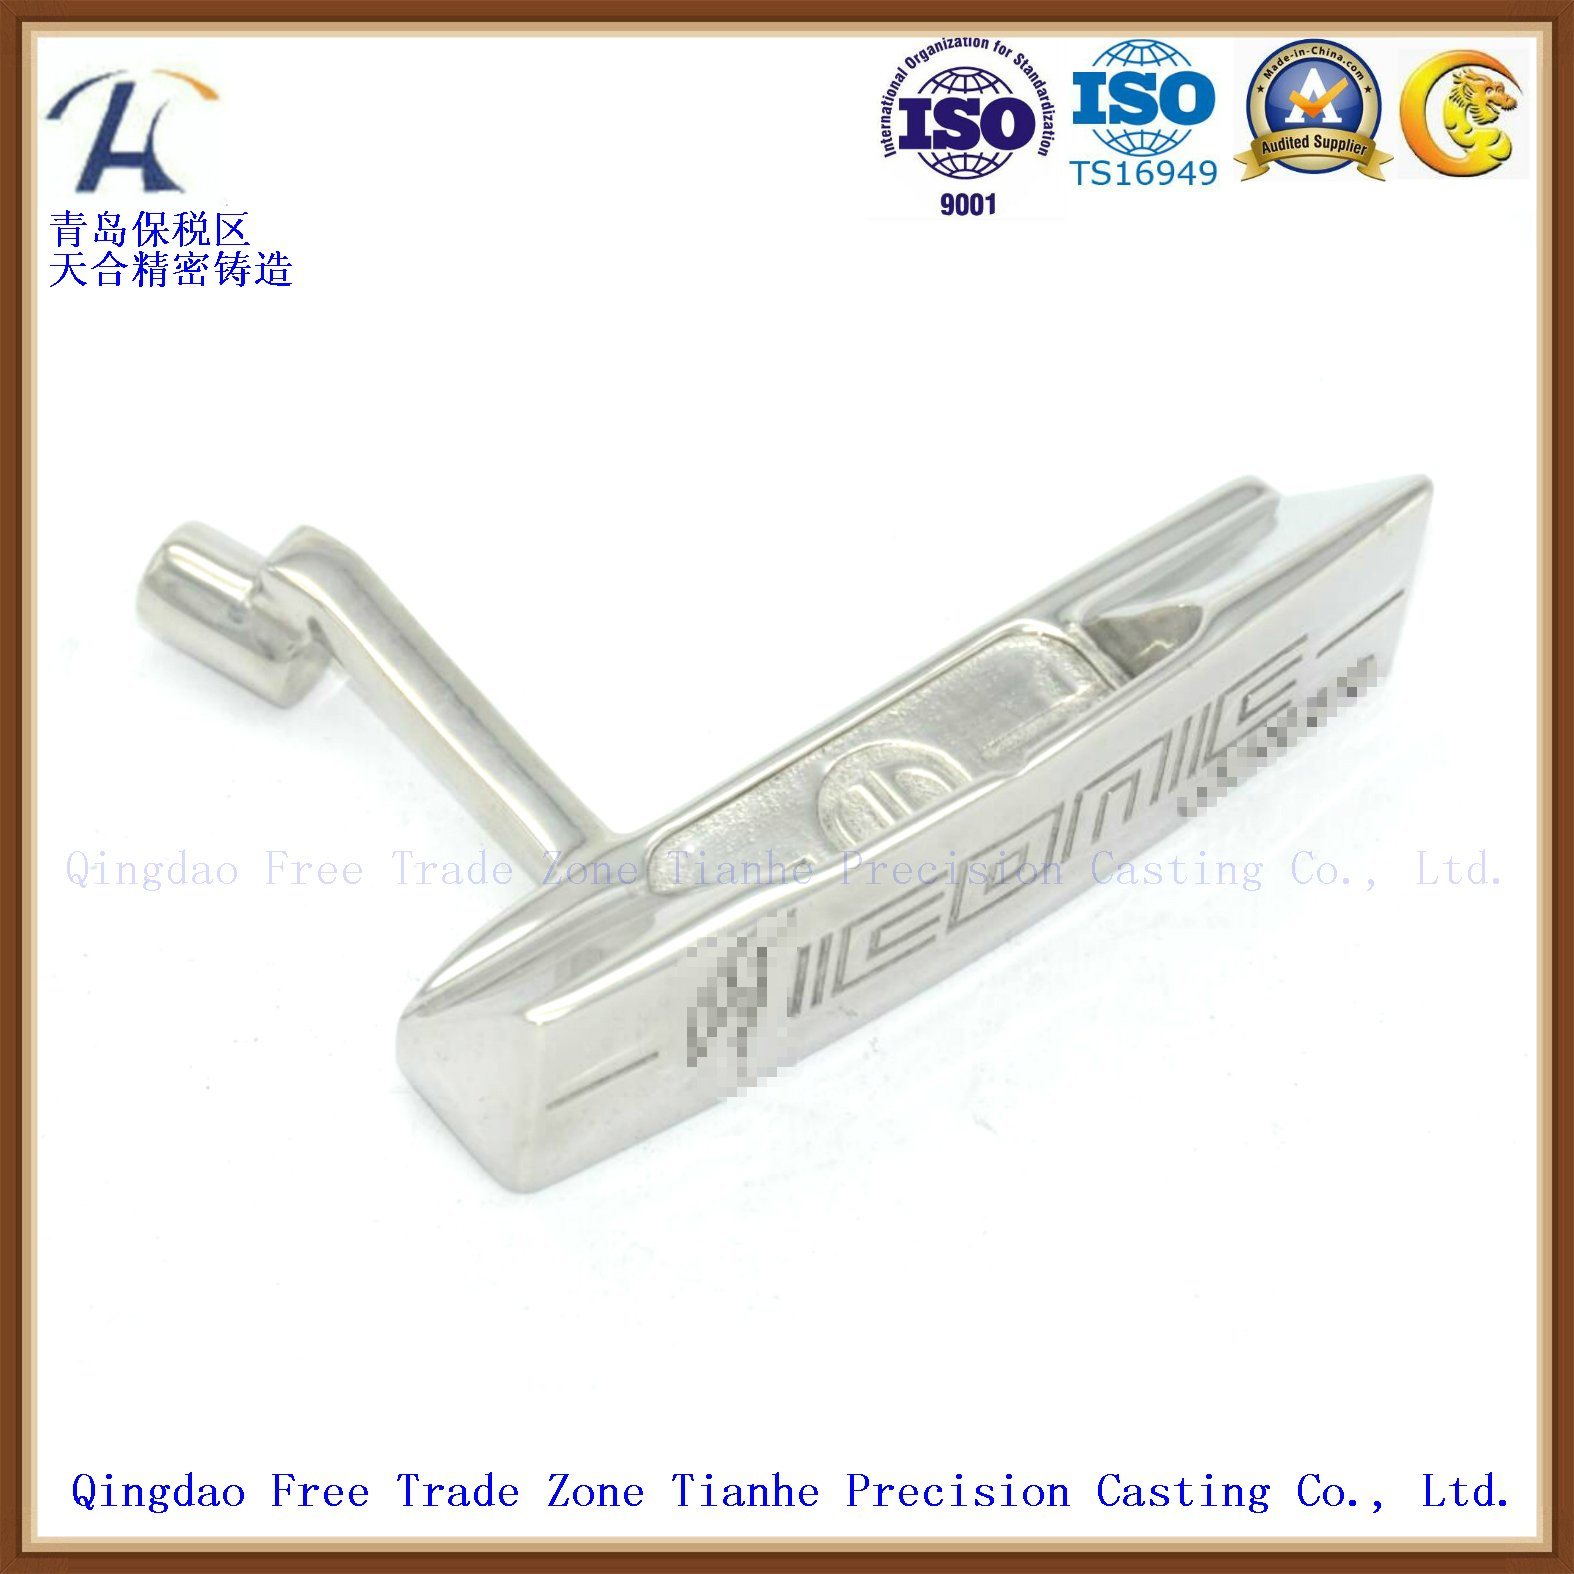 Machinery Parts, Hardwares, Fastener, Connector, Lost-Wax, Precision Casting, Investment Casting